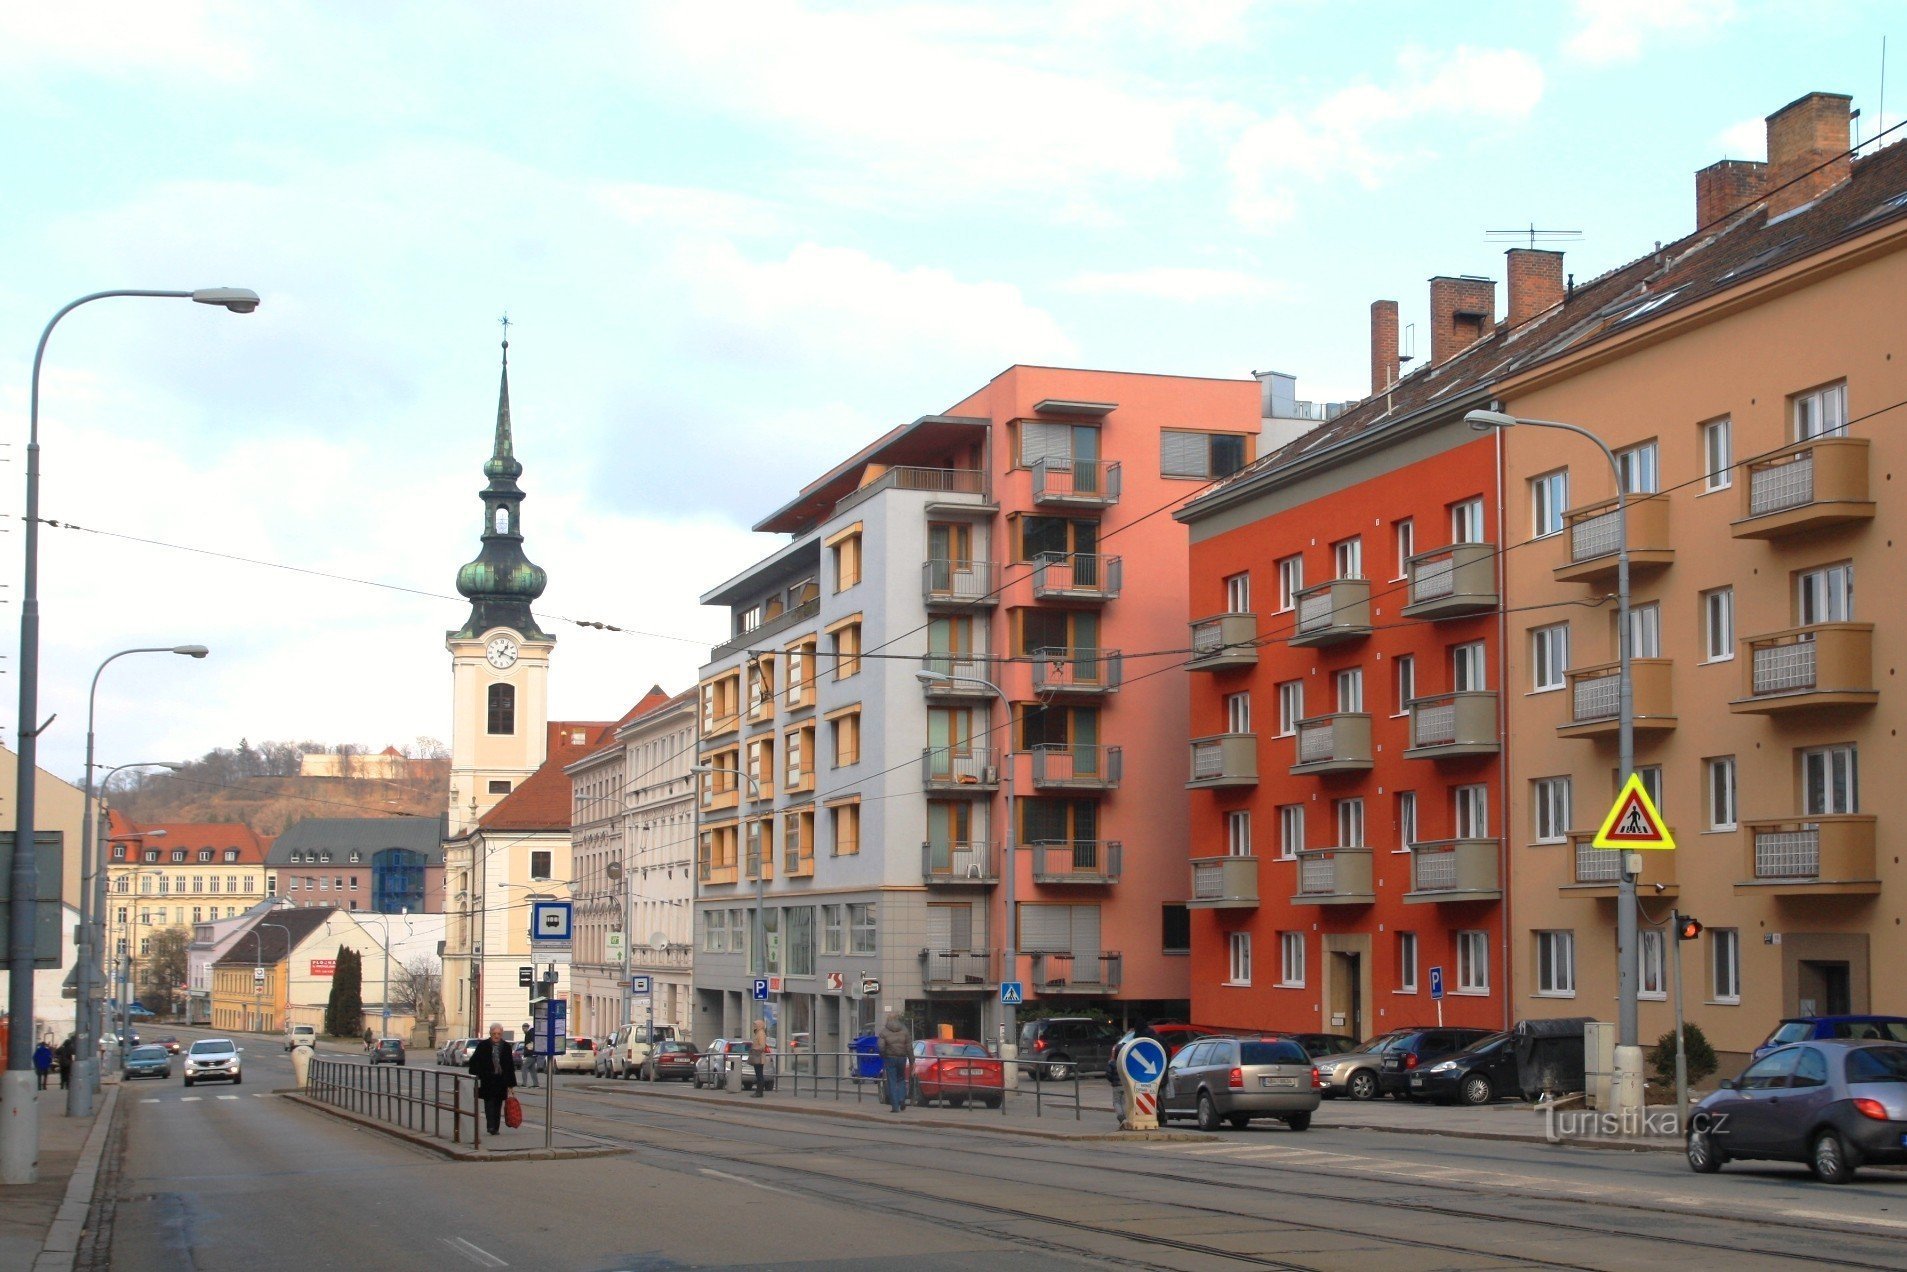 Public transport stops of the Merciful Brothers on Vídeňská Street, in the background the tower of the Church of St. Leopold